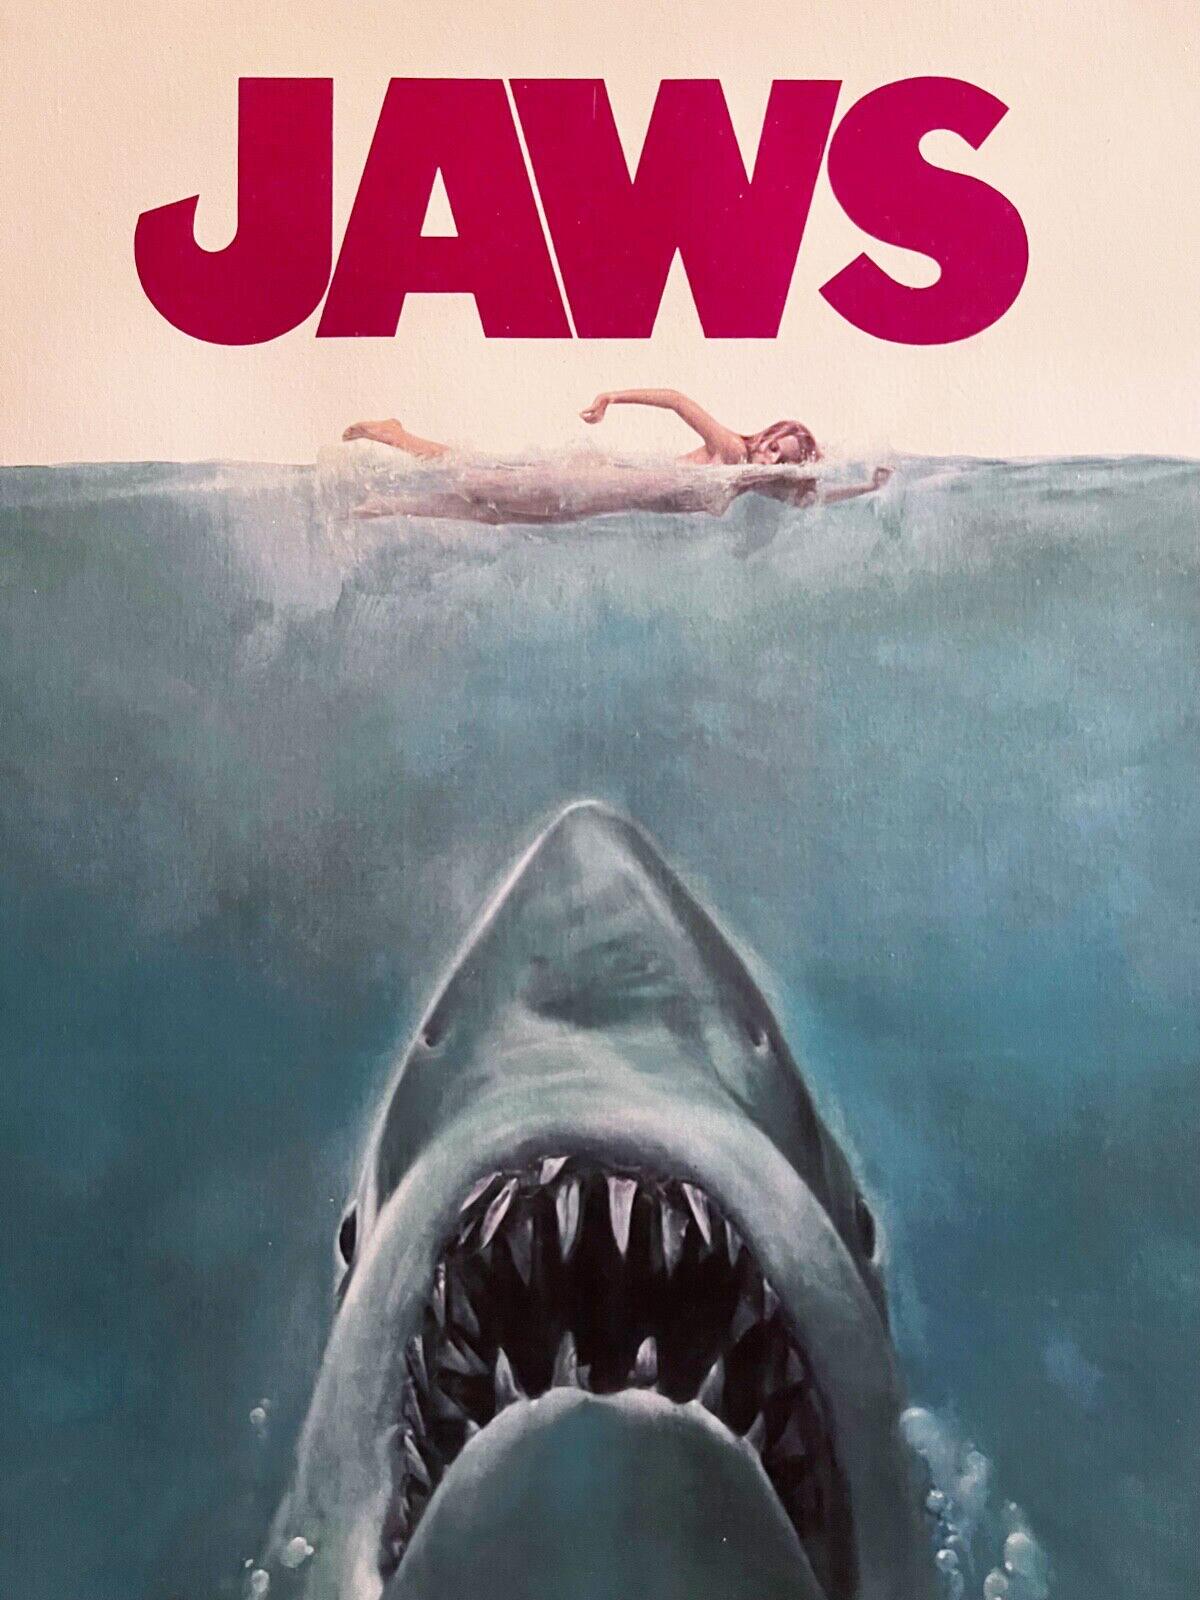 JAWS - 1975 ORIGINAL LINEN BACKED ONE SHEET MOVIE POSTER - Print by Punk Posters